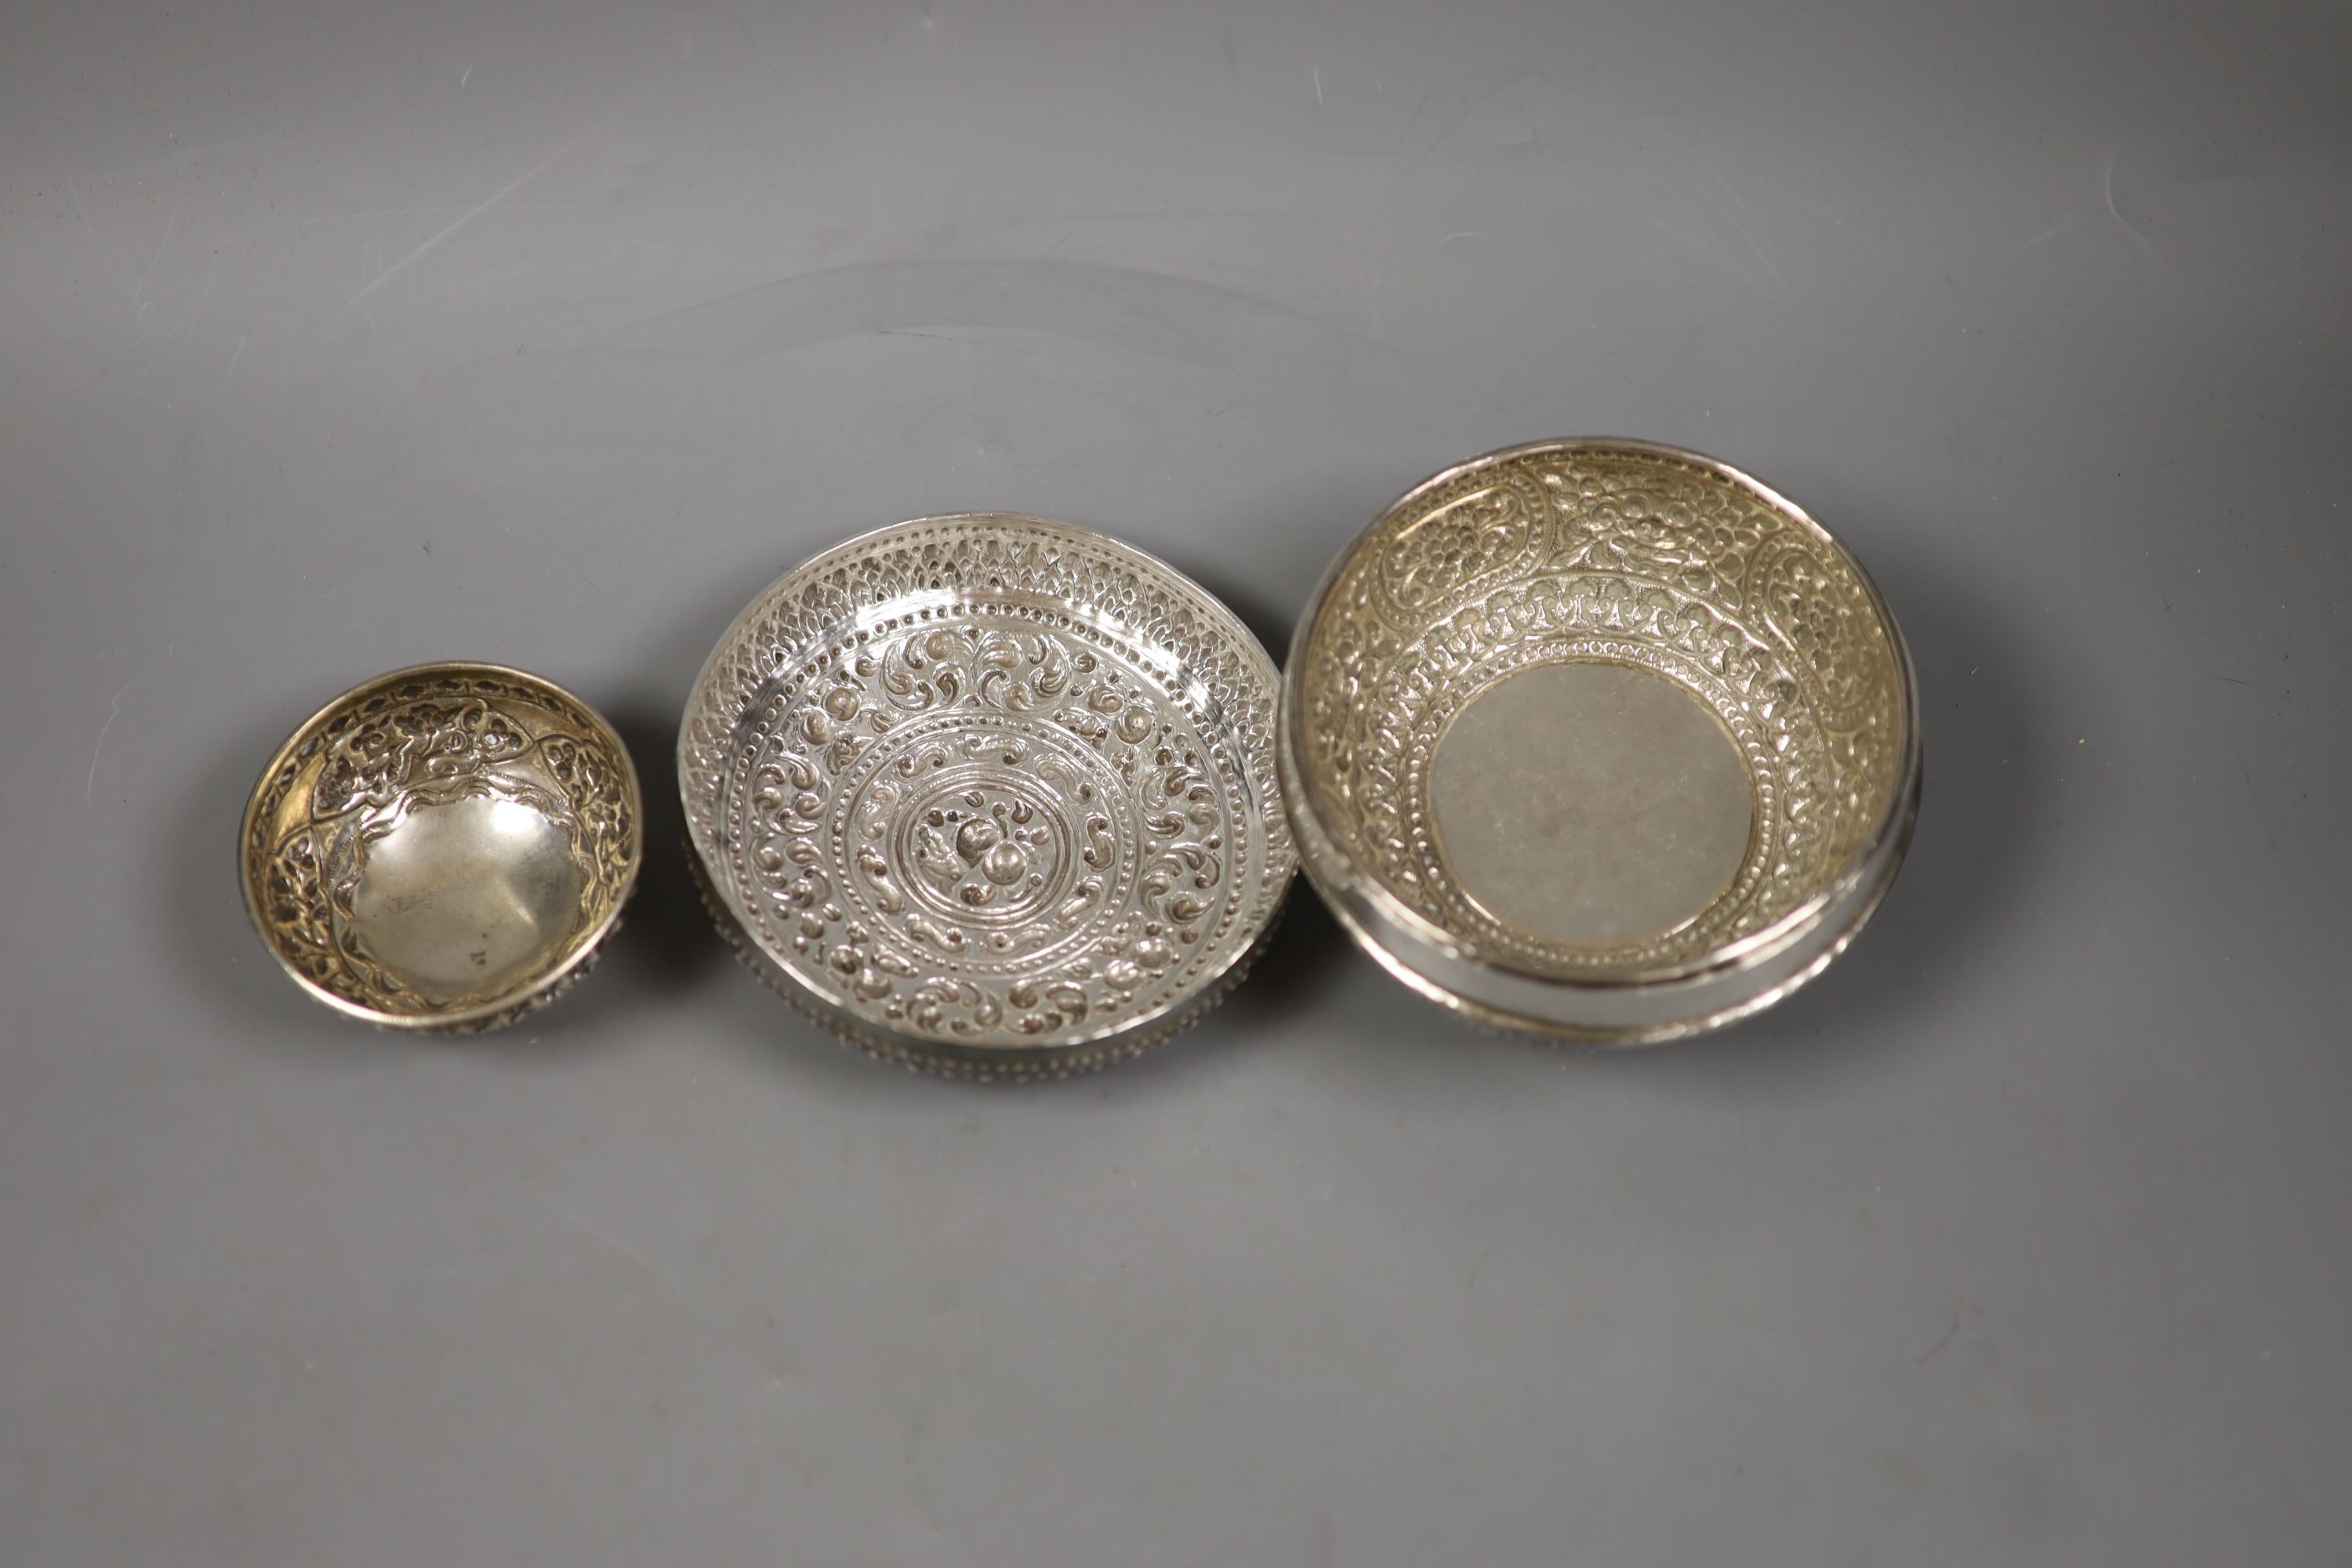 An Indonesian embossed white metal bowl and cover and two similar smaller bowls, largest diameter 13.5cm